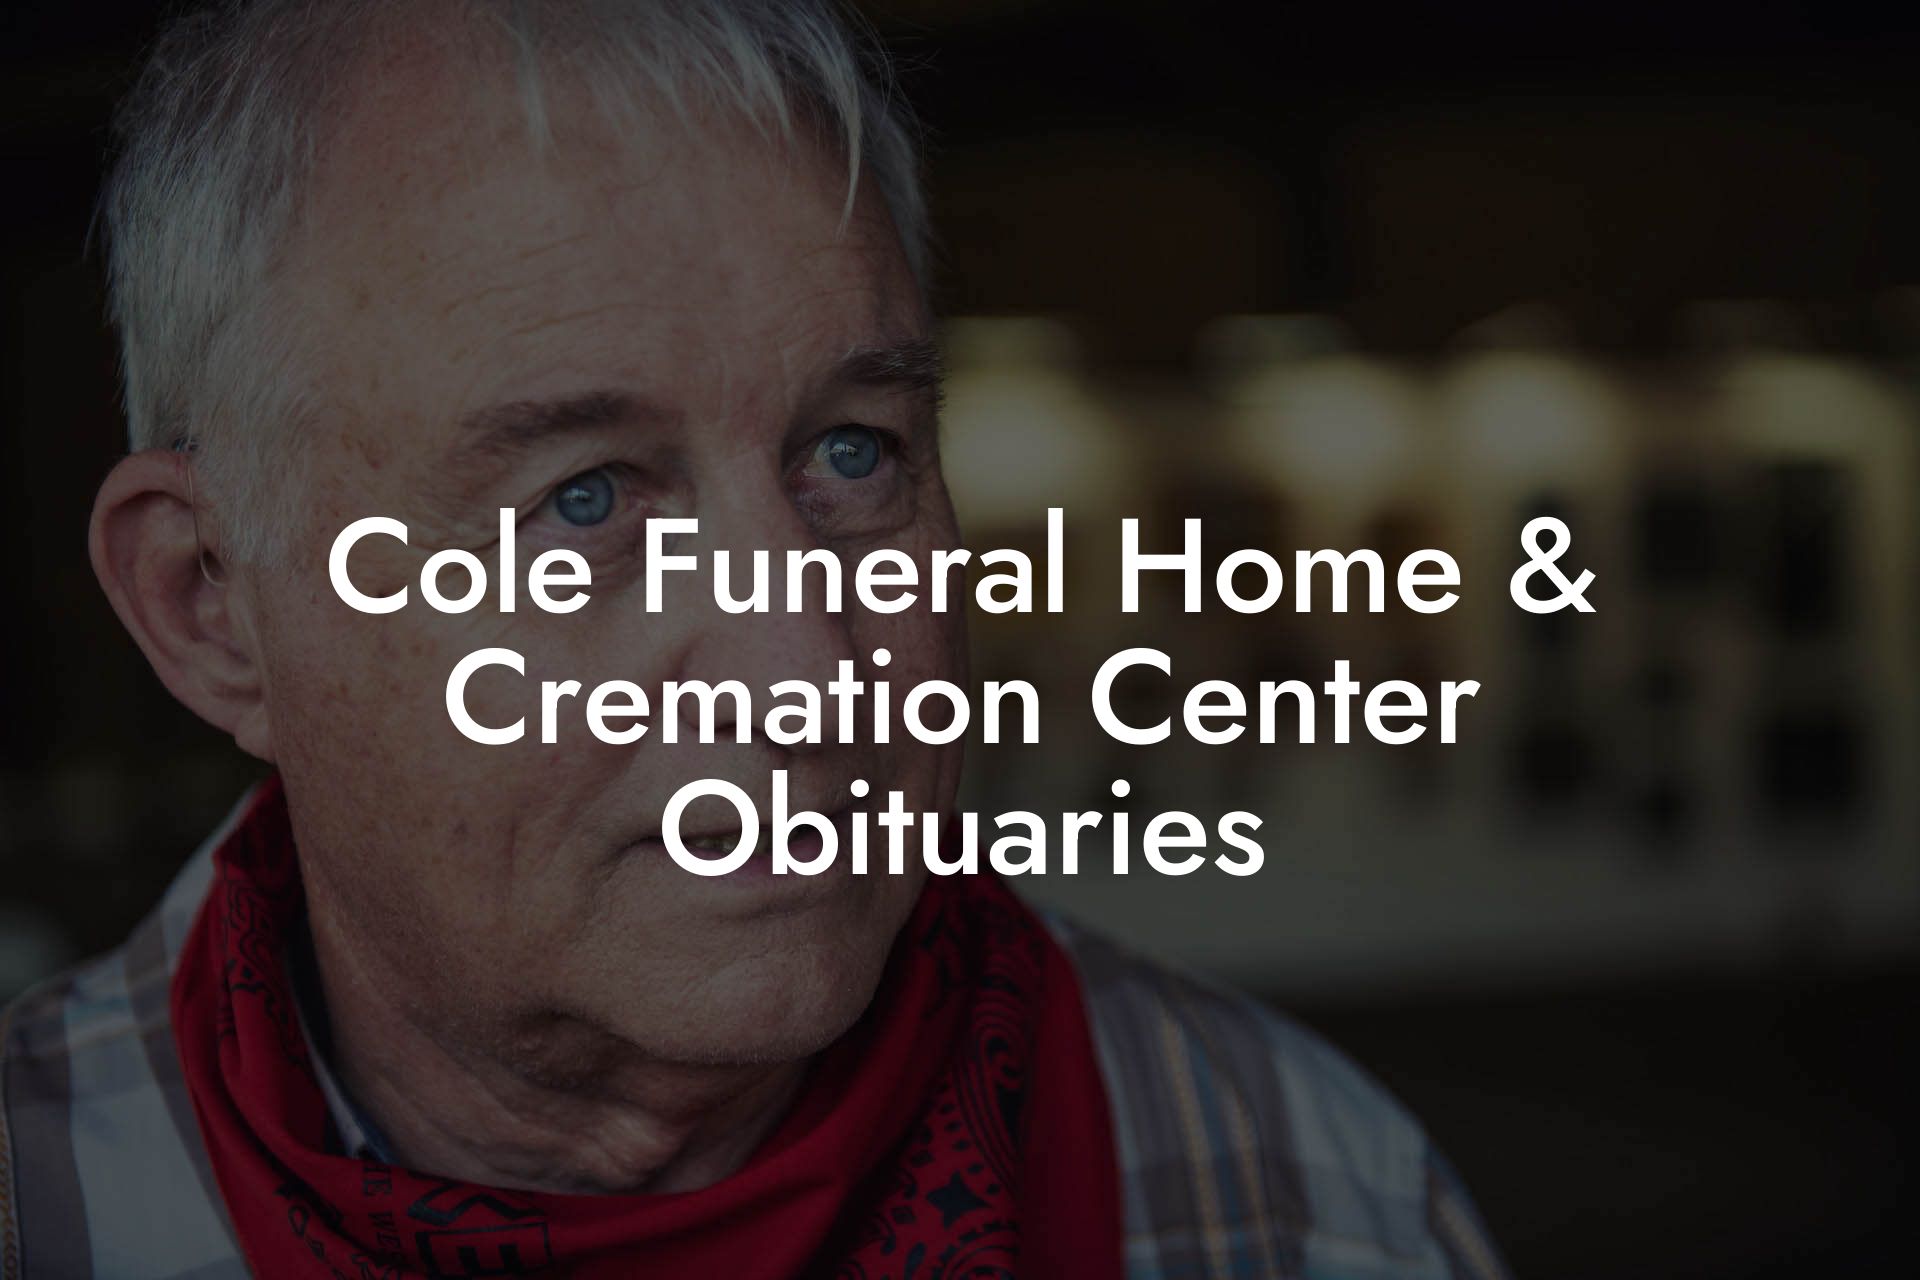 Cole Funeral Home & Cremation Center Obituaries